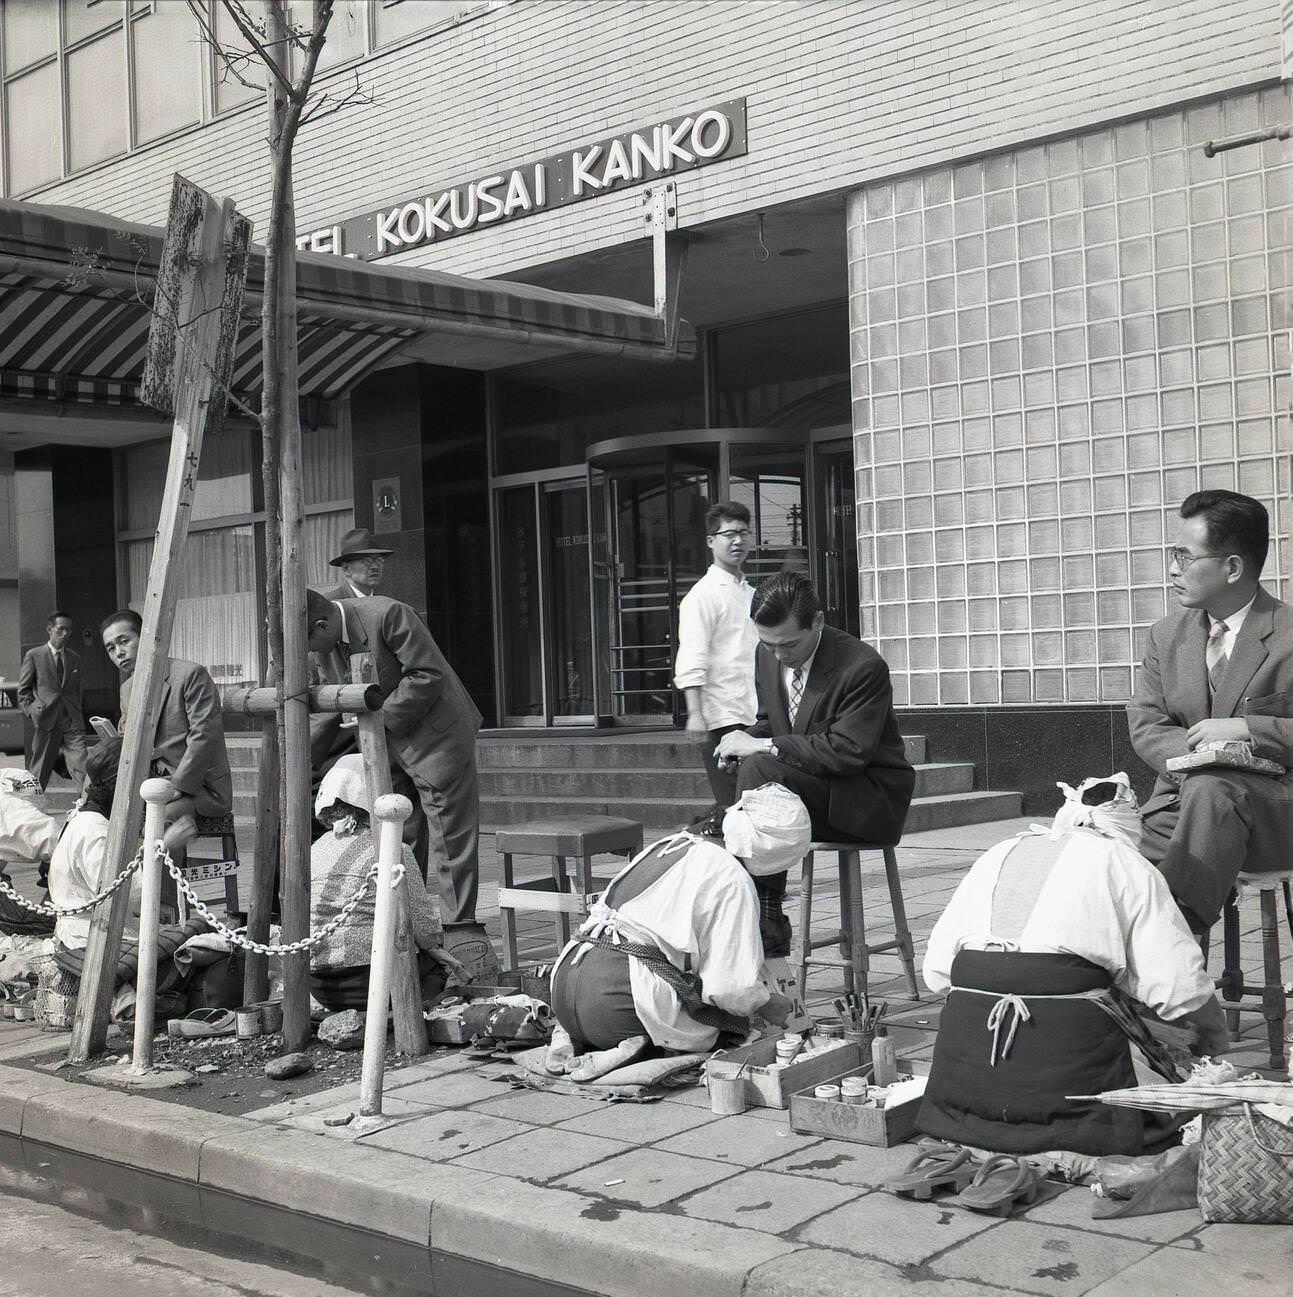 Japanese businessmen sit on little stools having their shoes polished and cleaned, 1950s.